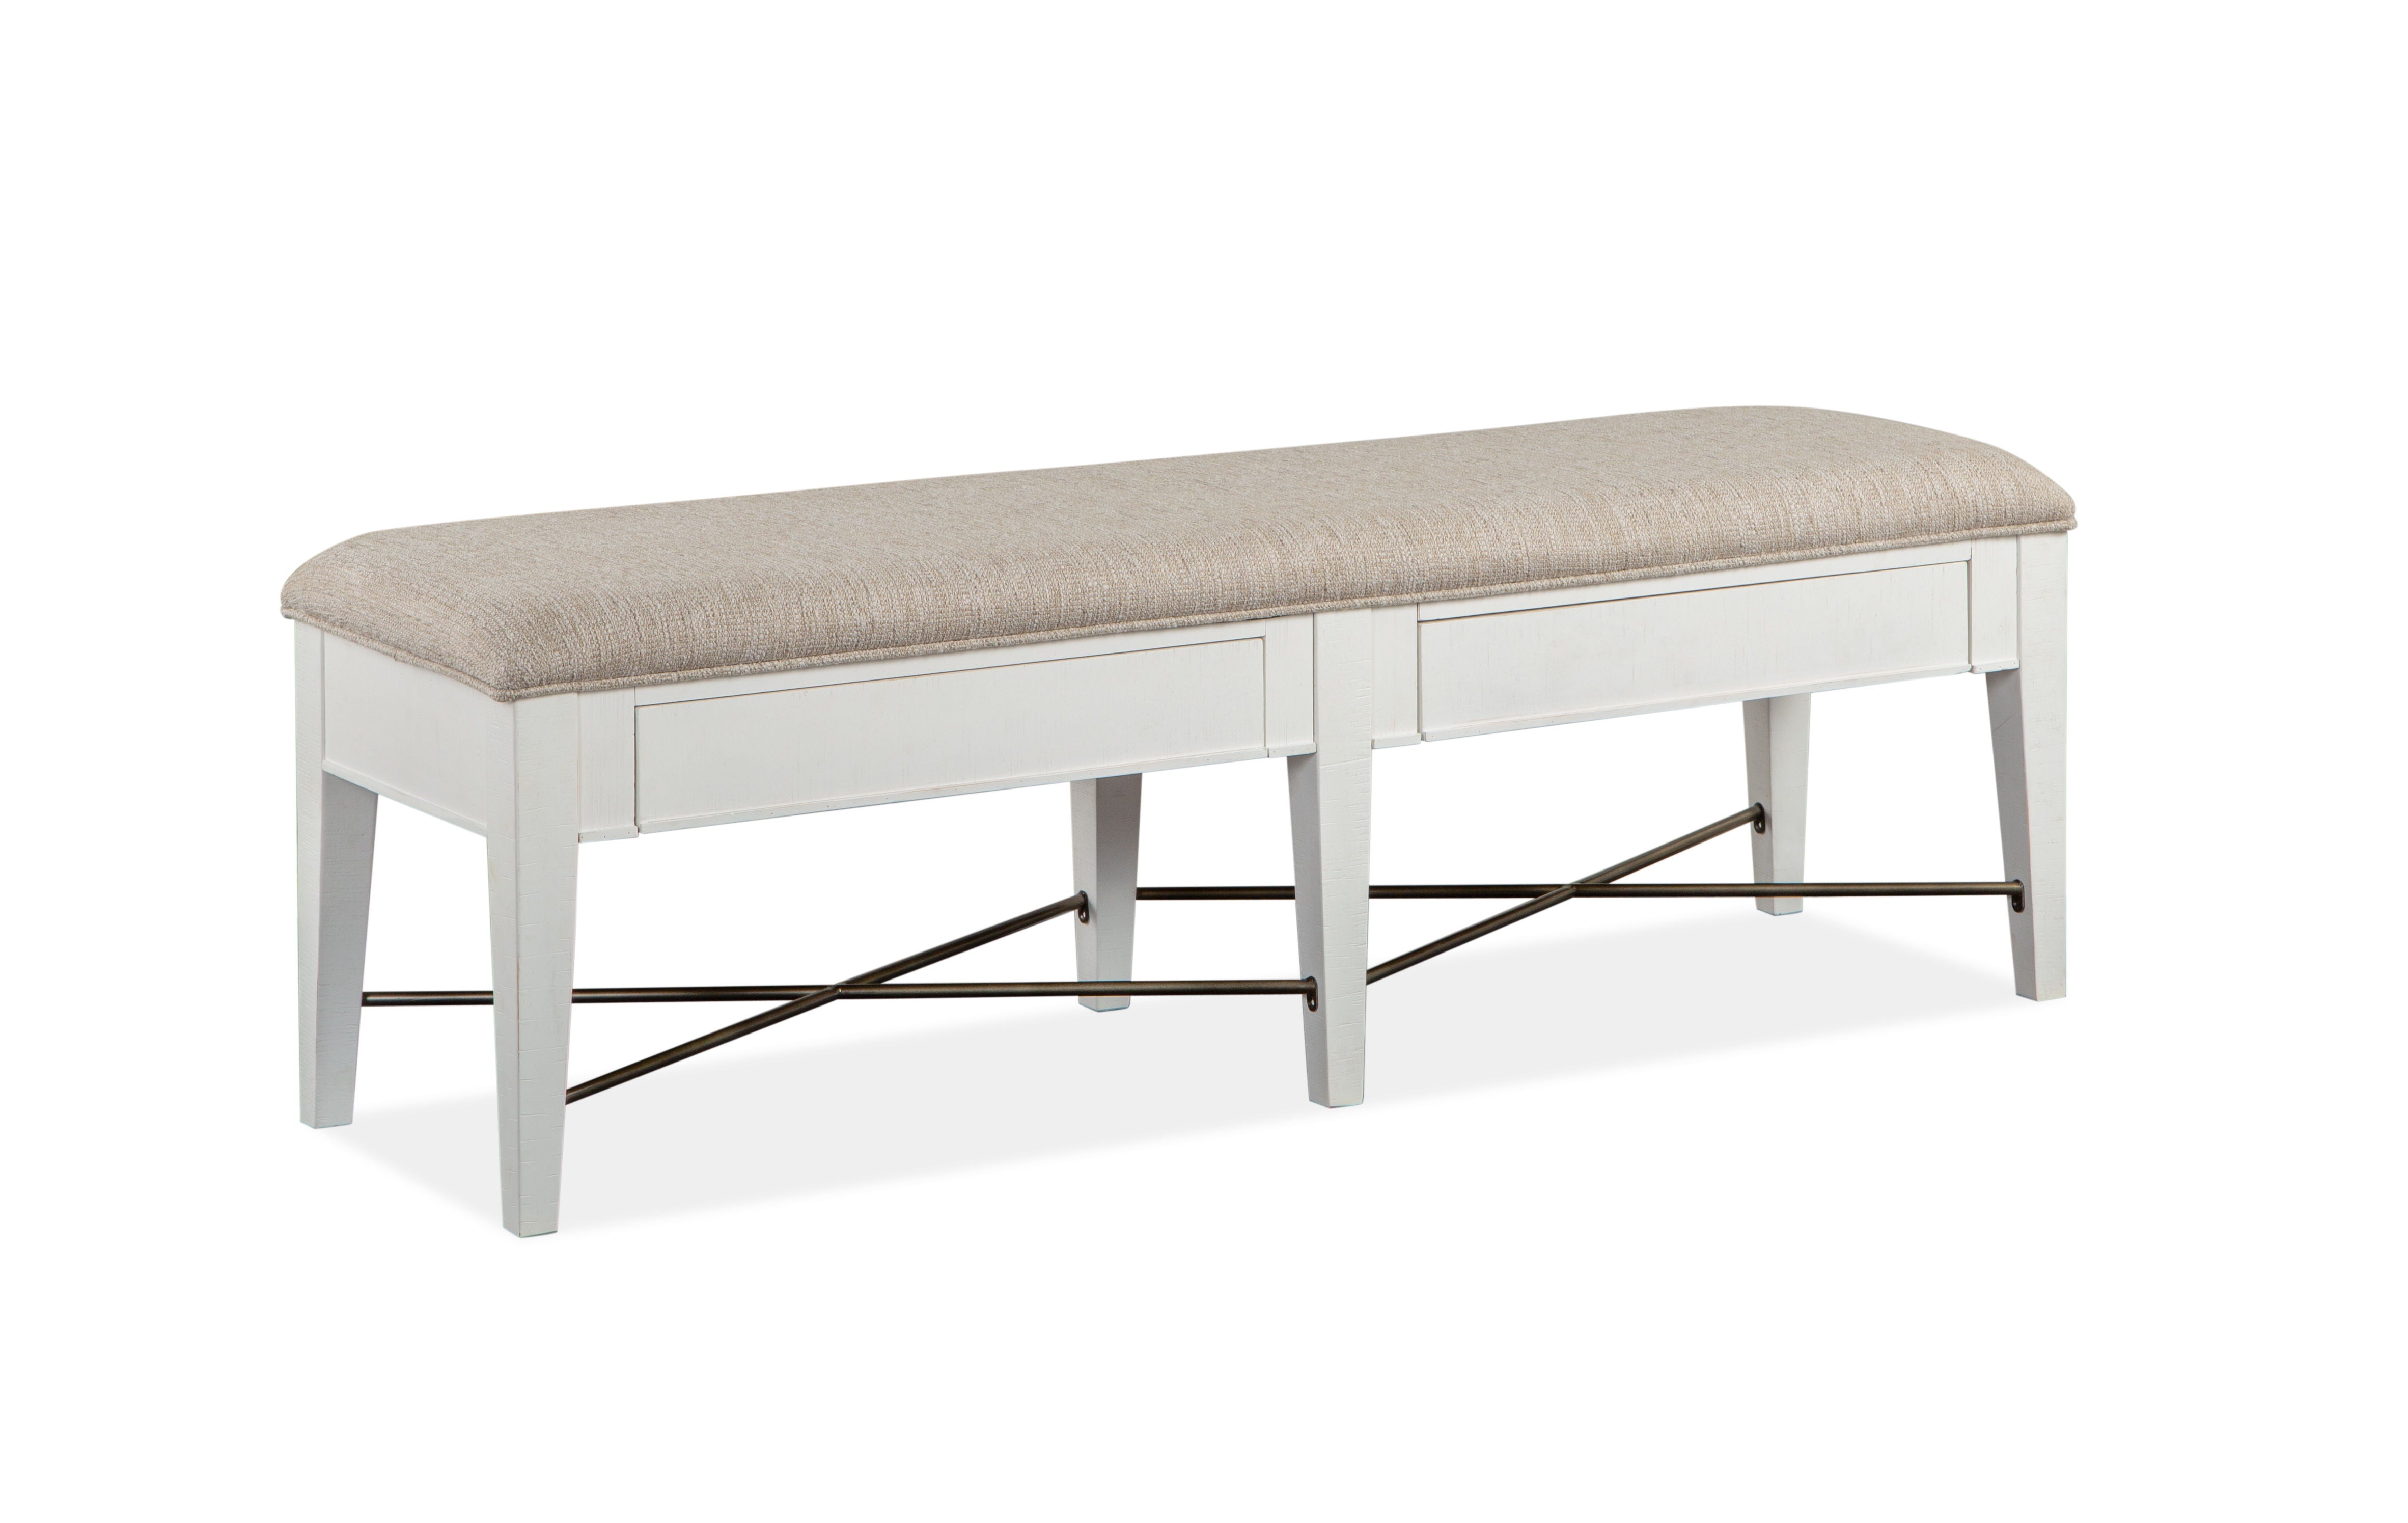 Heron Cove - Bench With Upholstered Seat - Chalk White